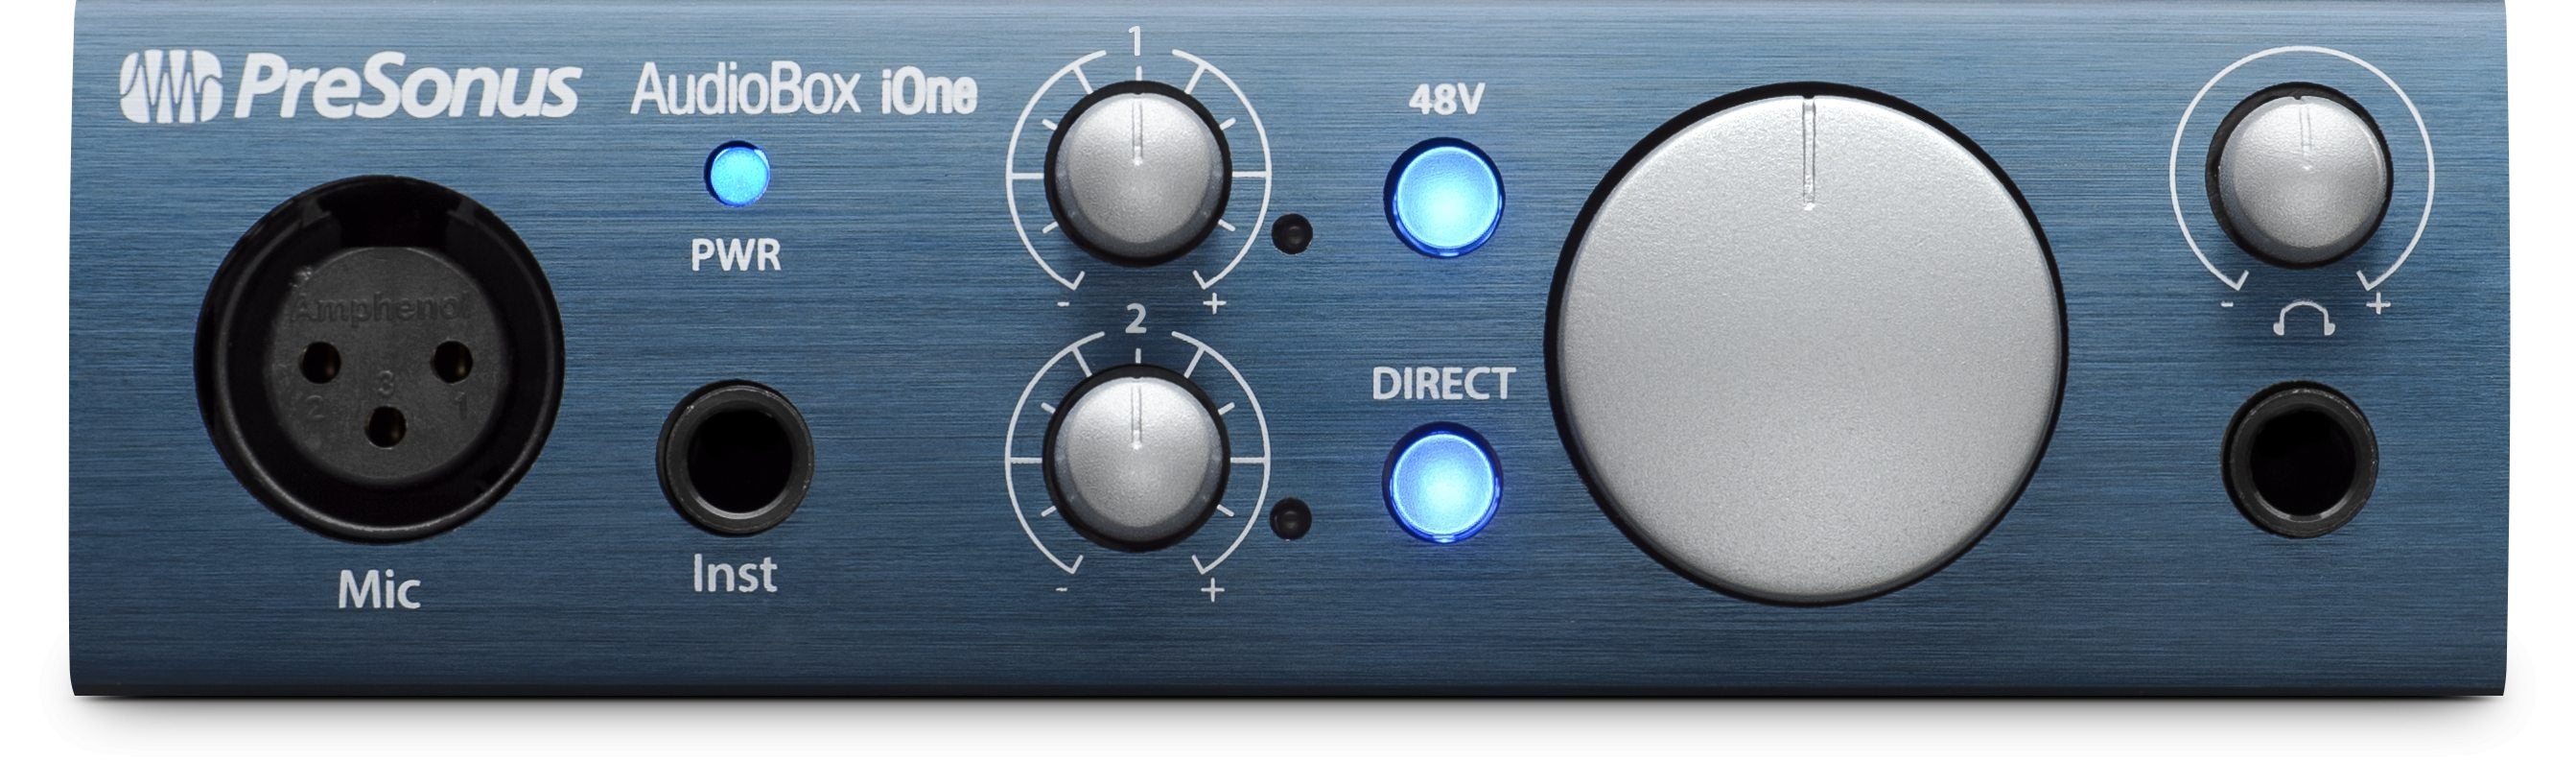 Presonus AudioBox iOne - The USB/iPad Audio Interface for Guitarists and Songwriters.